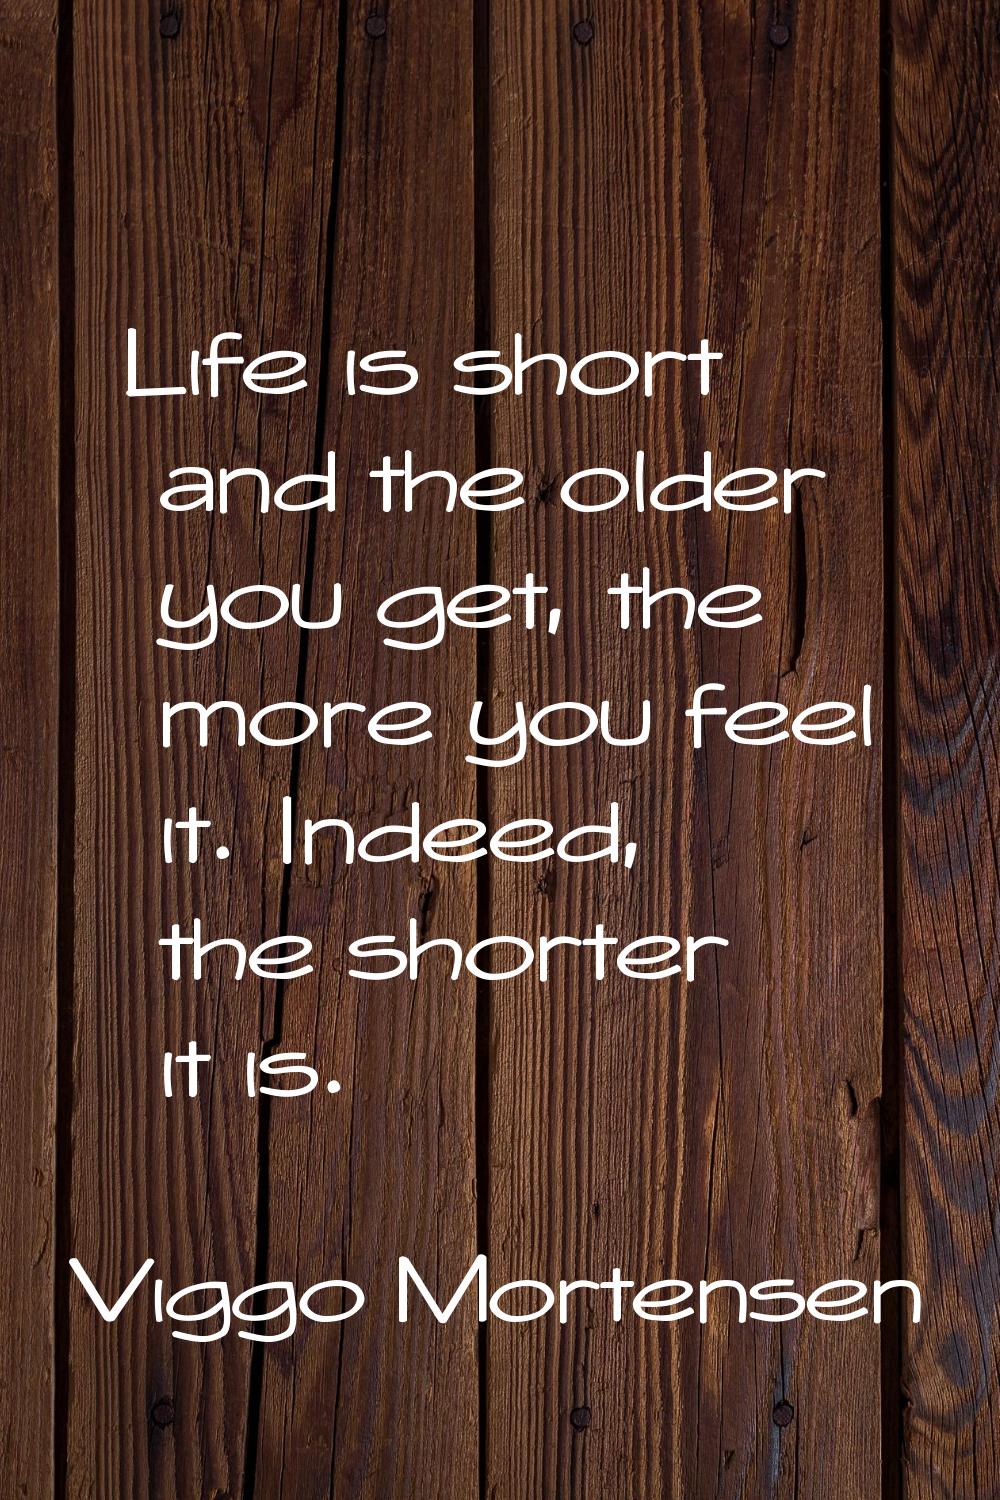 Life is short and the older you get, the more you feel it. Indeed, the shorter it is.